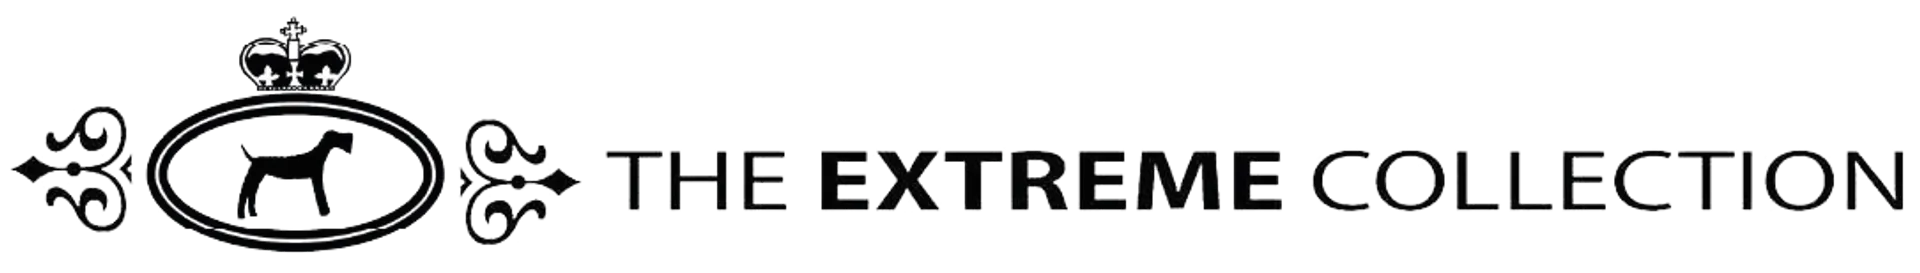 THE EXTREME COLLECTION logo